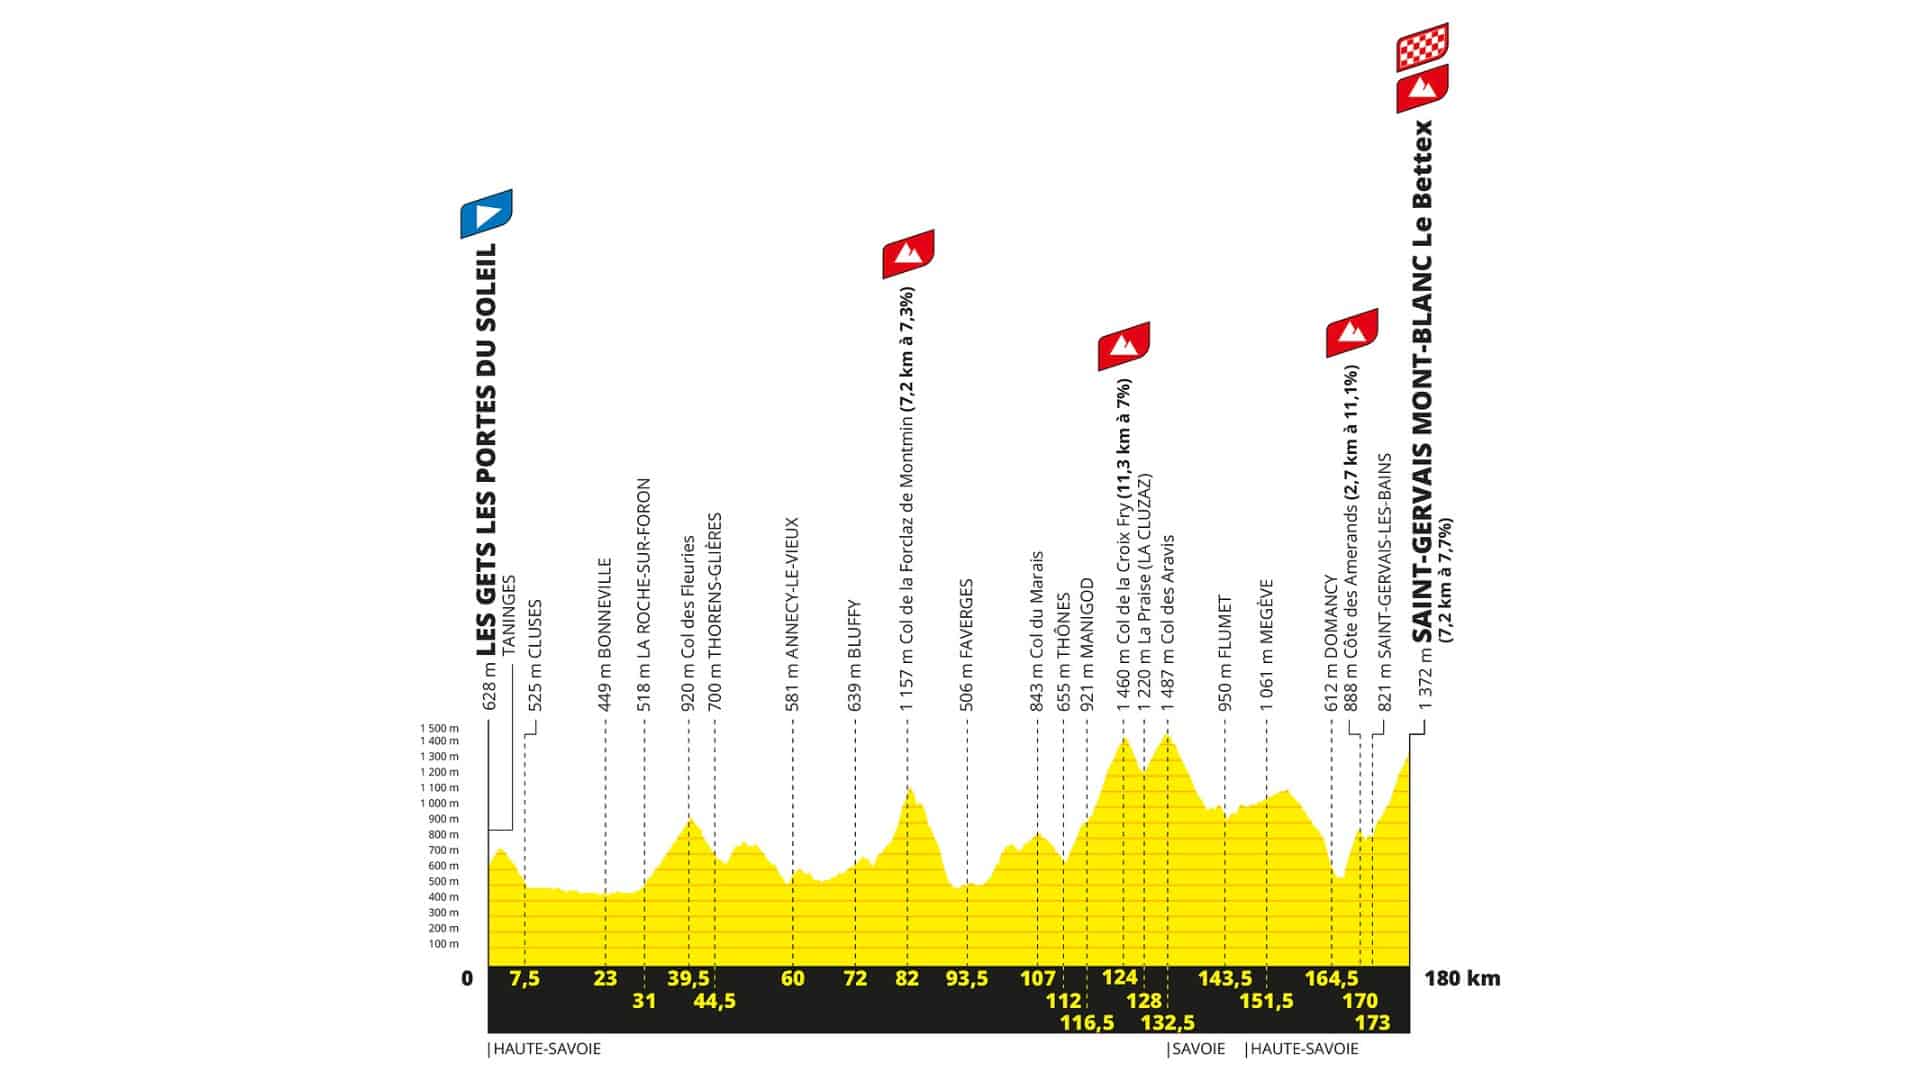 Graph showing the names of the stages and the climbs